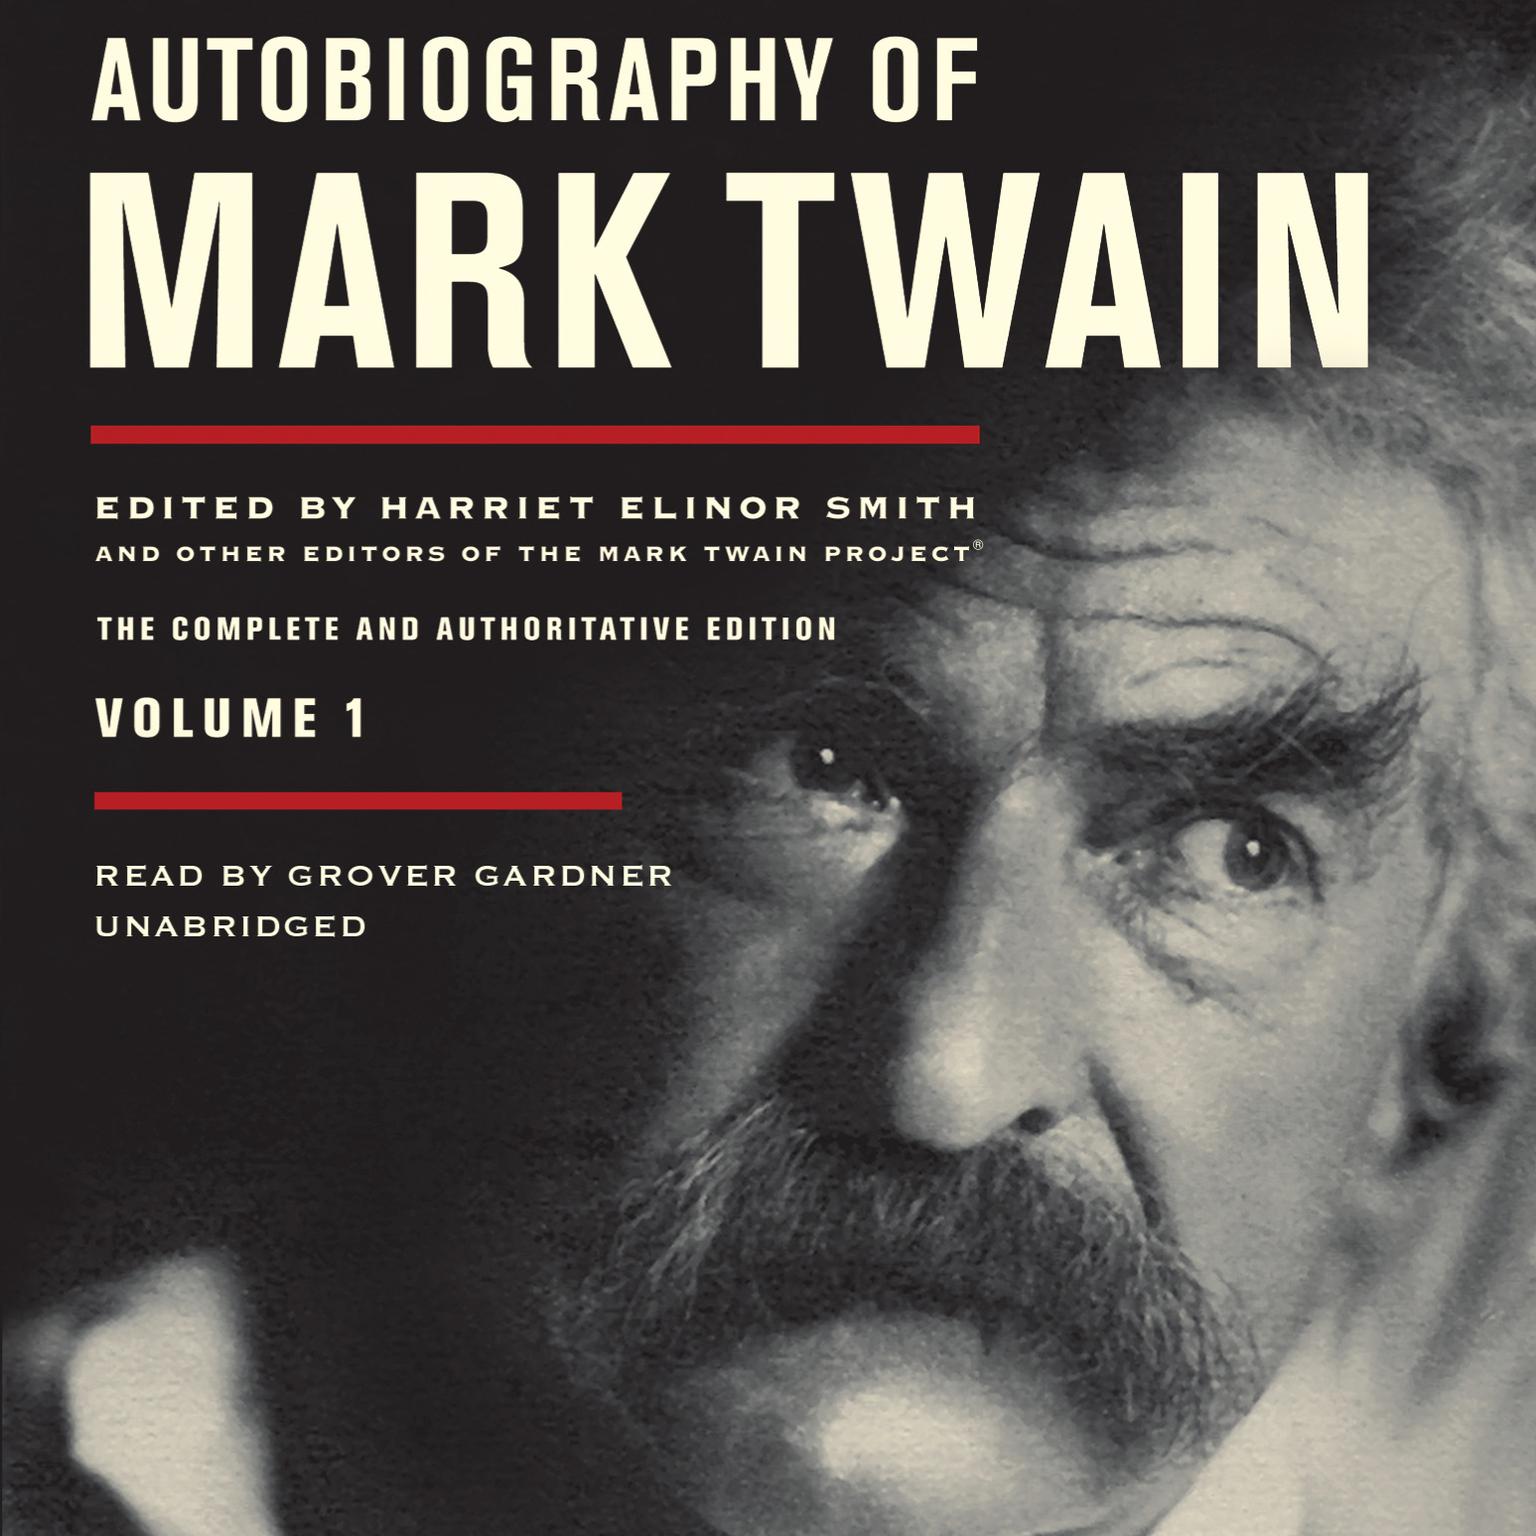 Autobiography of Mark Twain, Vol. 1: The Complete and Authoritative Edition Audiobook, by Mark Twain